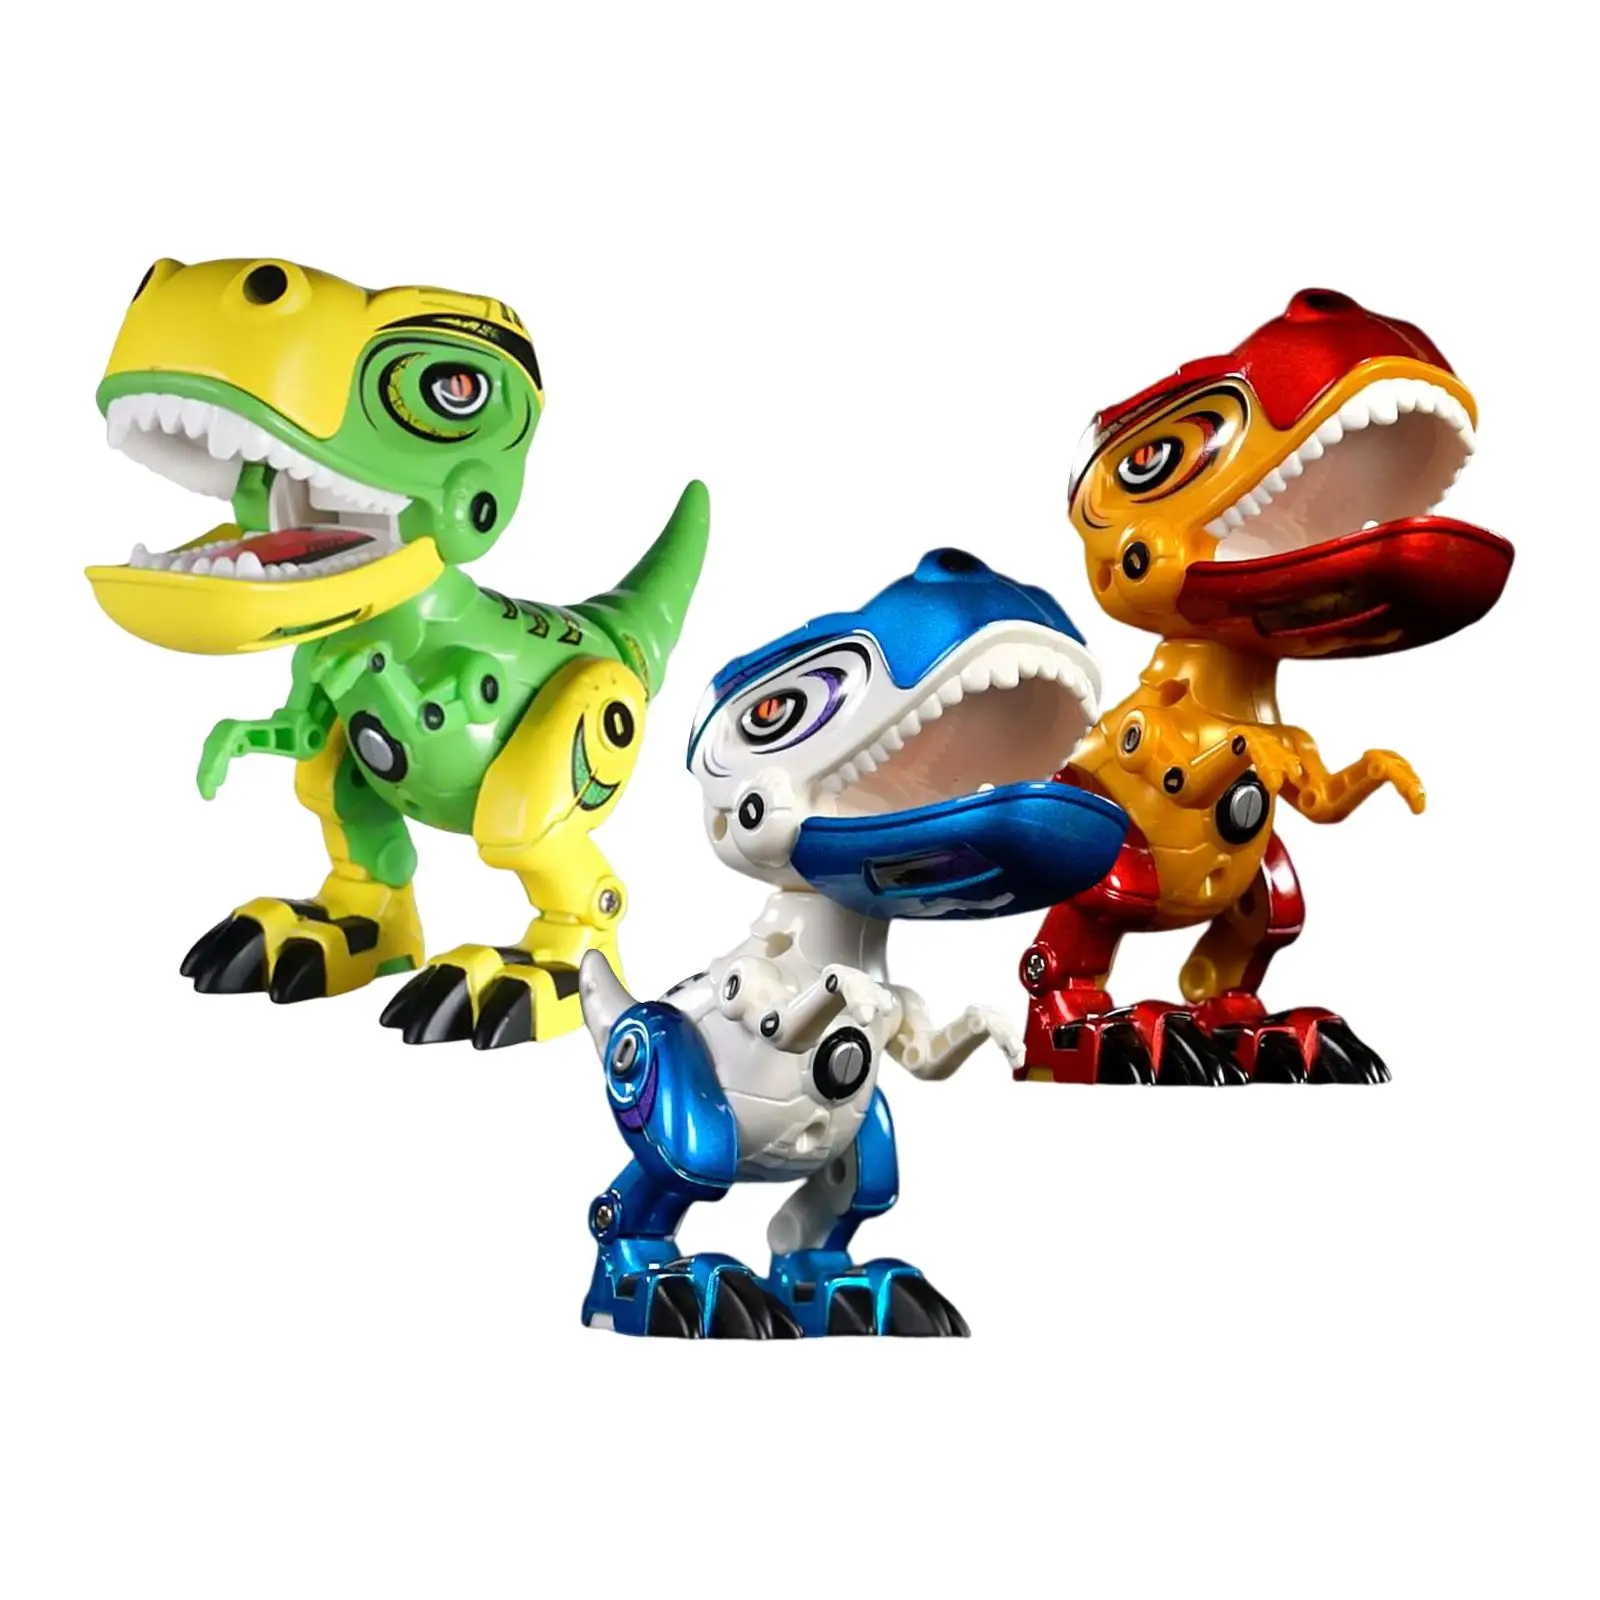 Multifunction Electric Dinosaur Animals Toy Early Education Toy Animal Model Figure Toy for Children Girls Kids Birthday Gifts